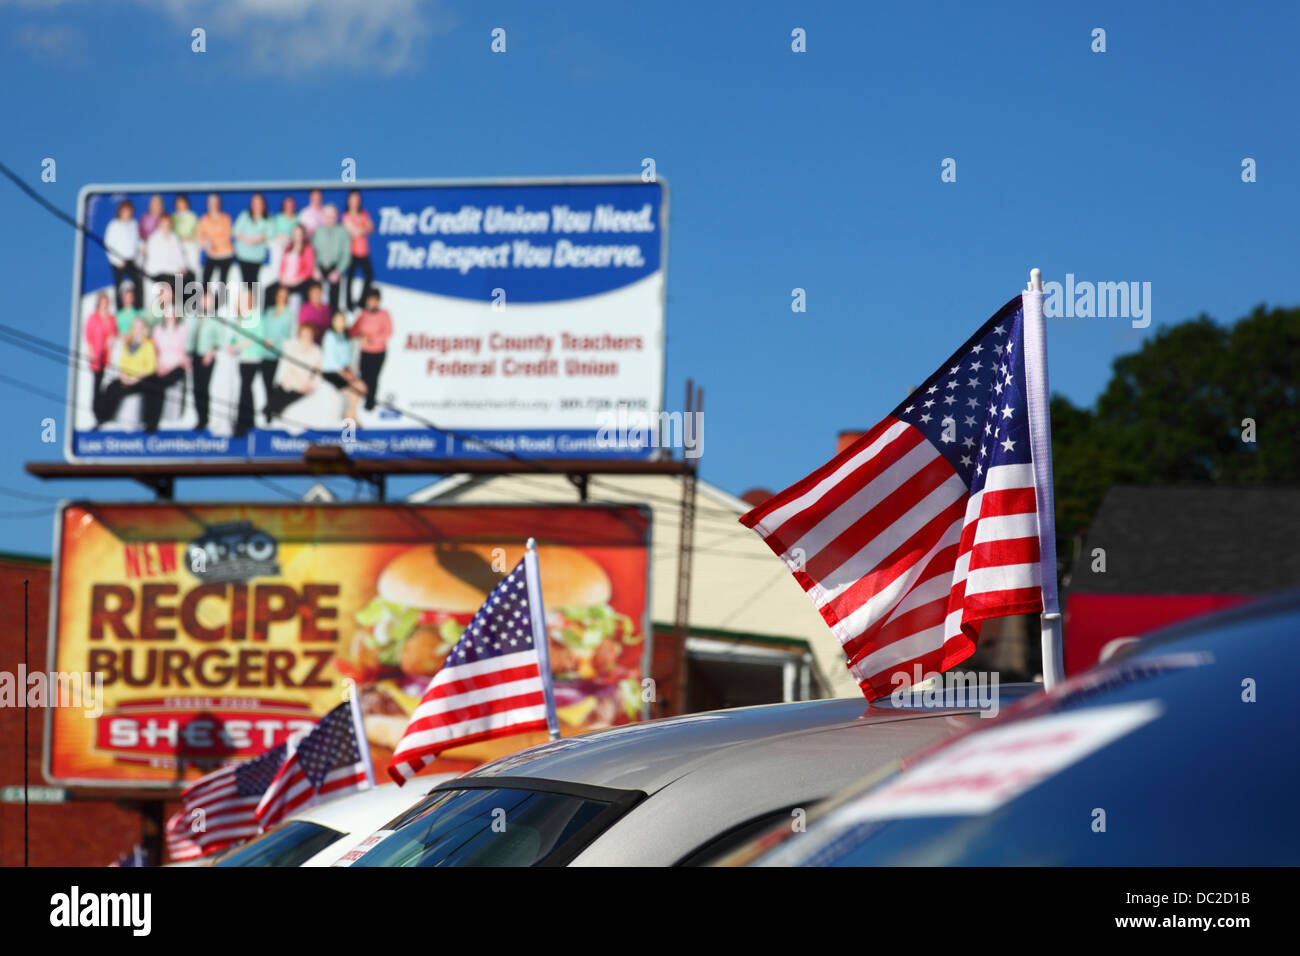 American flags on brand new cars n front of Recipe Burgerz and Allegany County Teachers Federal Credit Union billboards, Cumberland, Maryland, USA Stock Photo